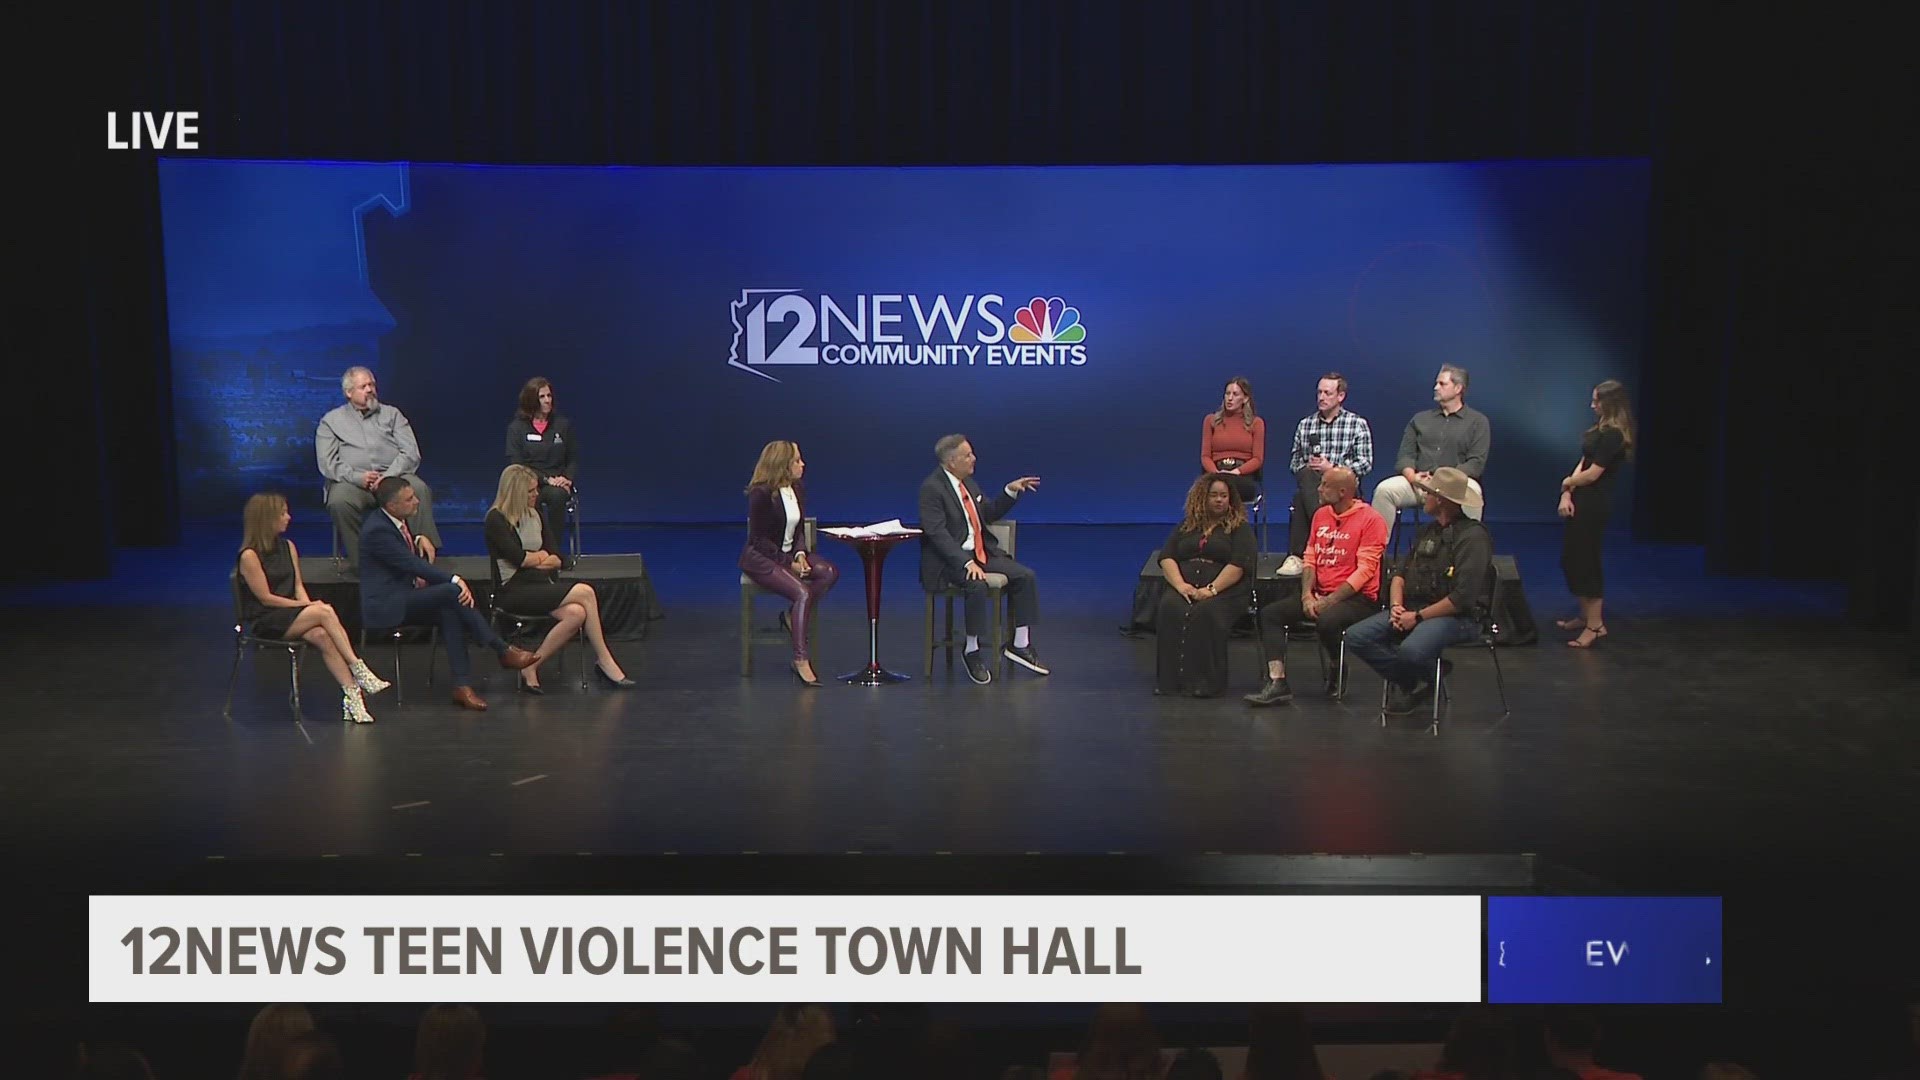 At the 12News Town Hall on Teen Violence in the East Valley, 12News speaks with a panel of experts about the role social media has played in the violence